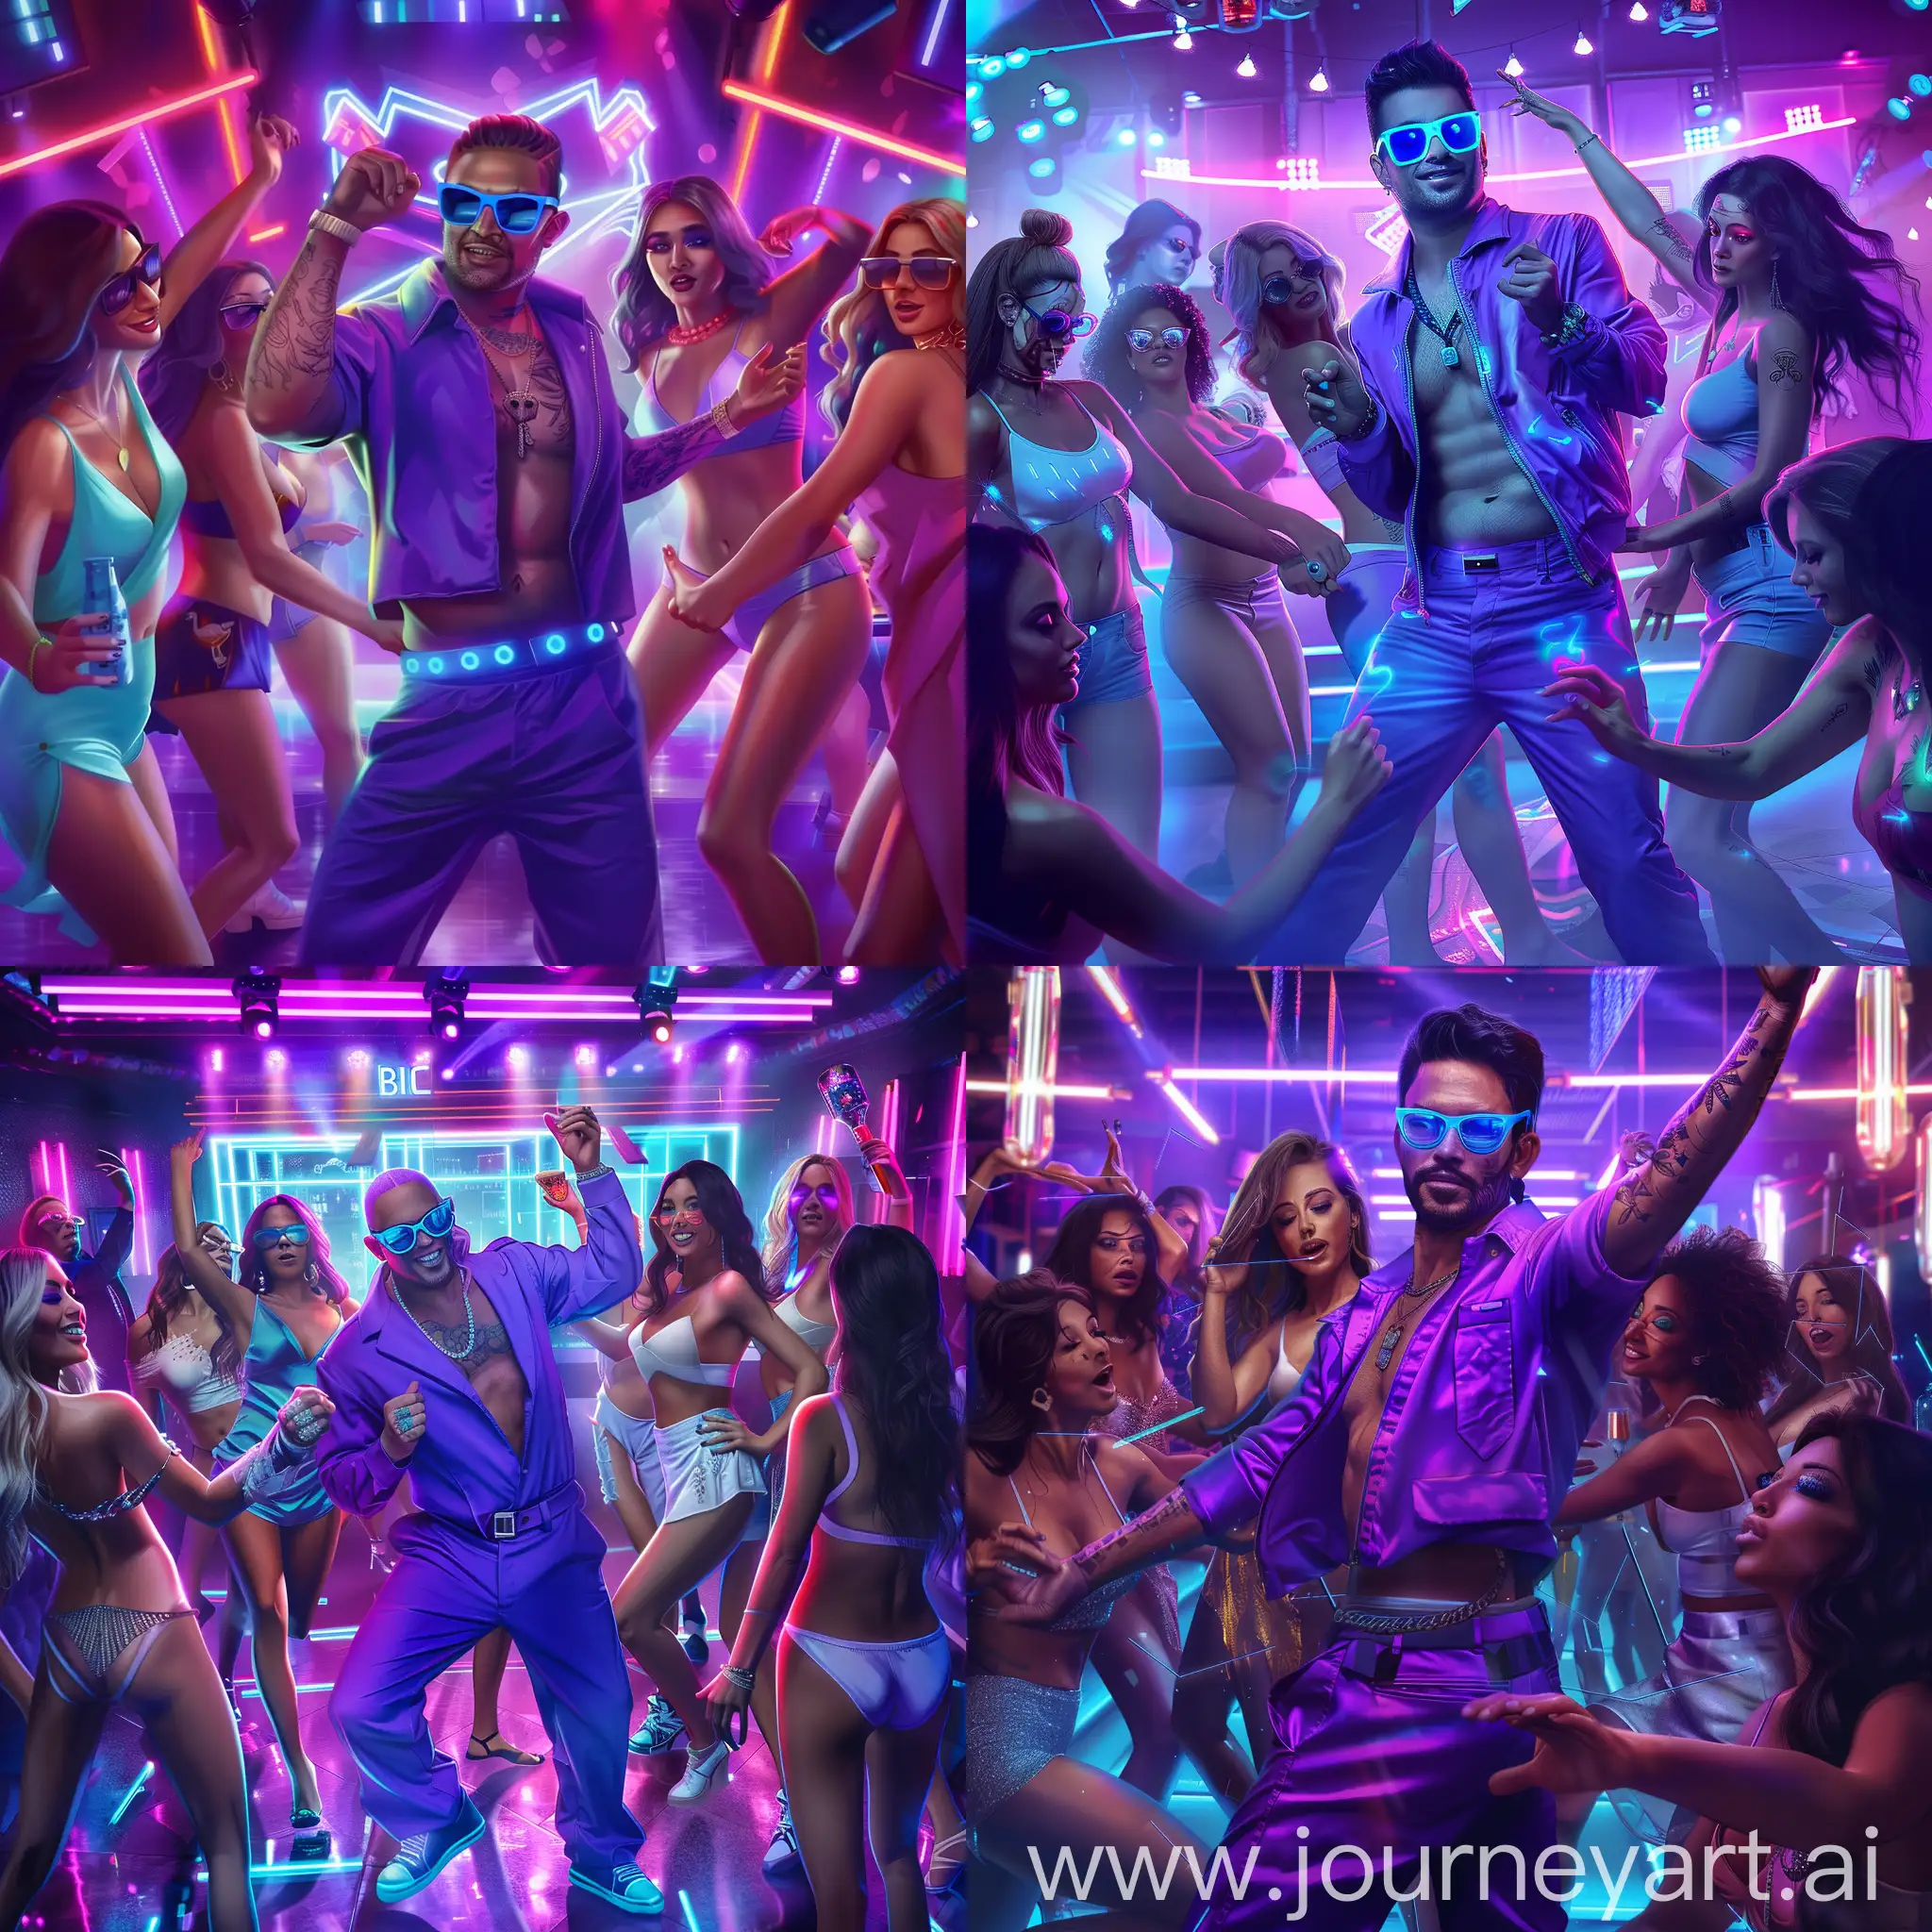 Create a realistic master piece image of a purple bouncer with blue glasses dancing surrounded by beautiful women in a nightclub with neon lights. 